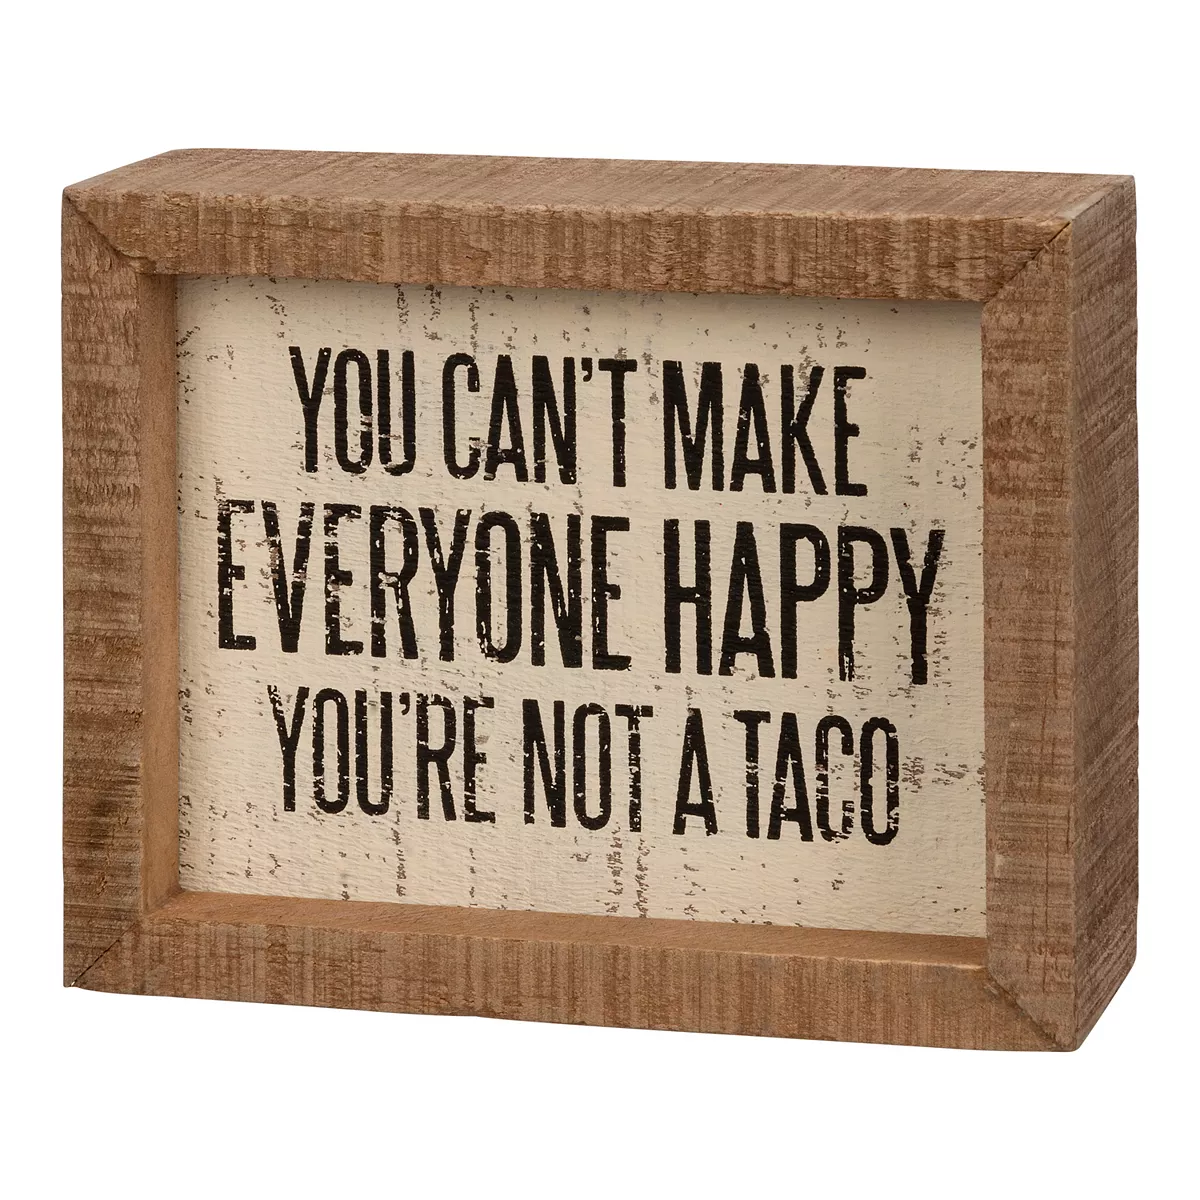 NEW You Can&#39;t Make Everyone Happy You&#39;re Not a Taco Wooden Box Sign 5x4x1.75 in. - $7.50